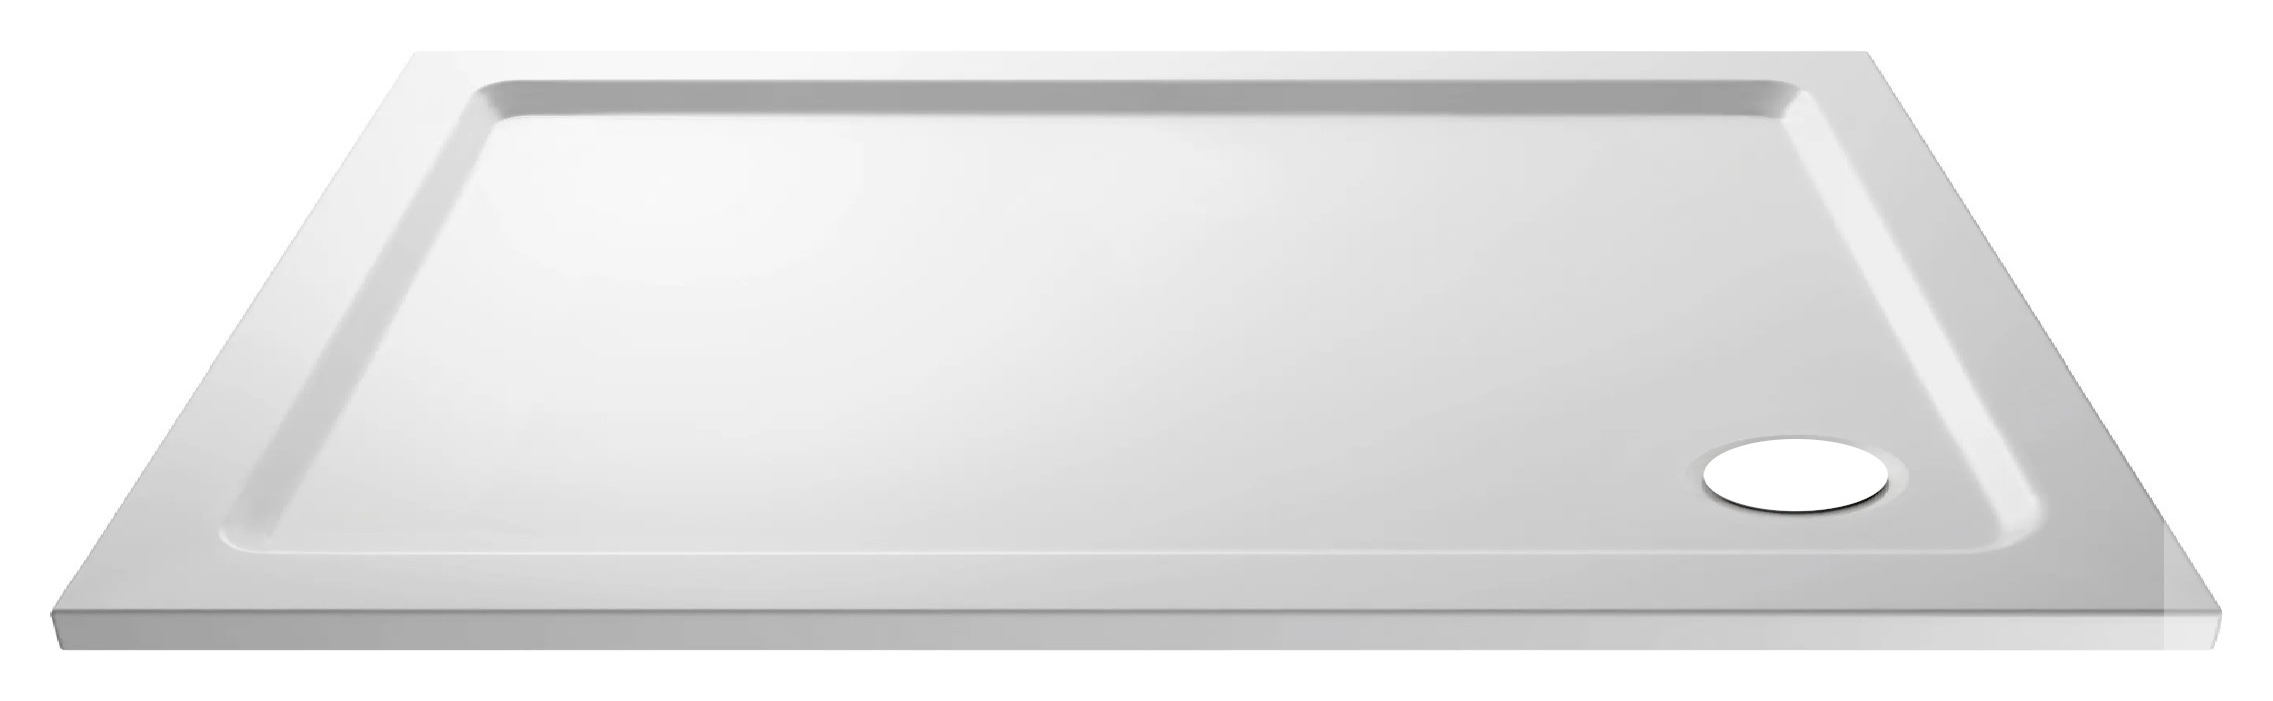 Image of Wickes 40mm Pearlstone Rectangular Shower Tray - 1200 x 700mm